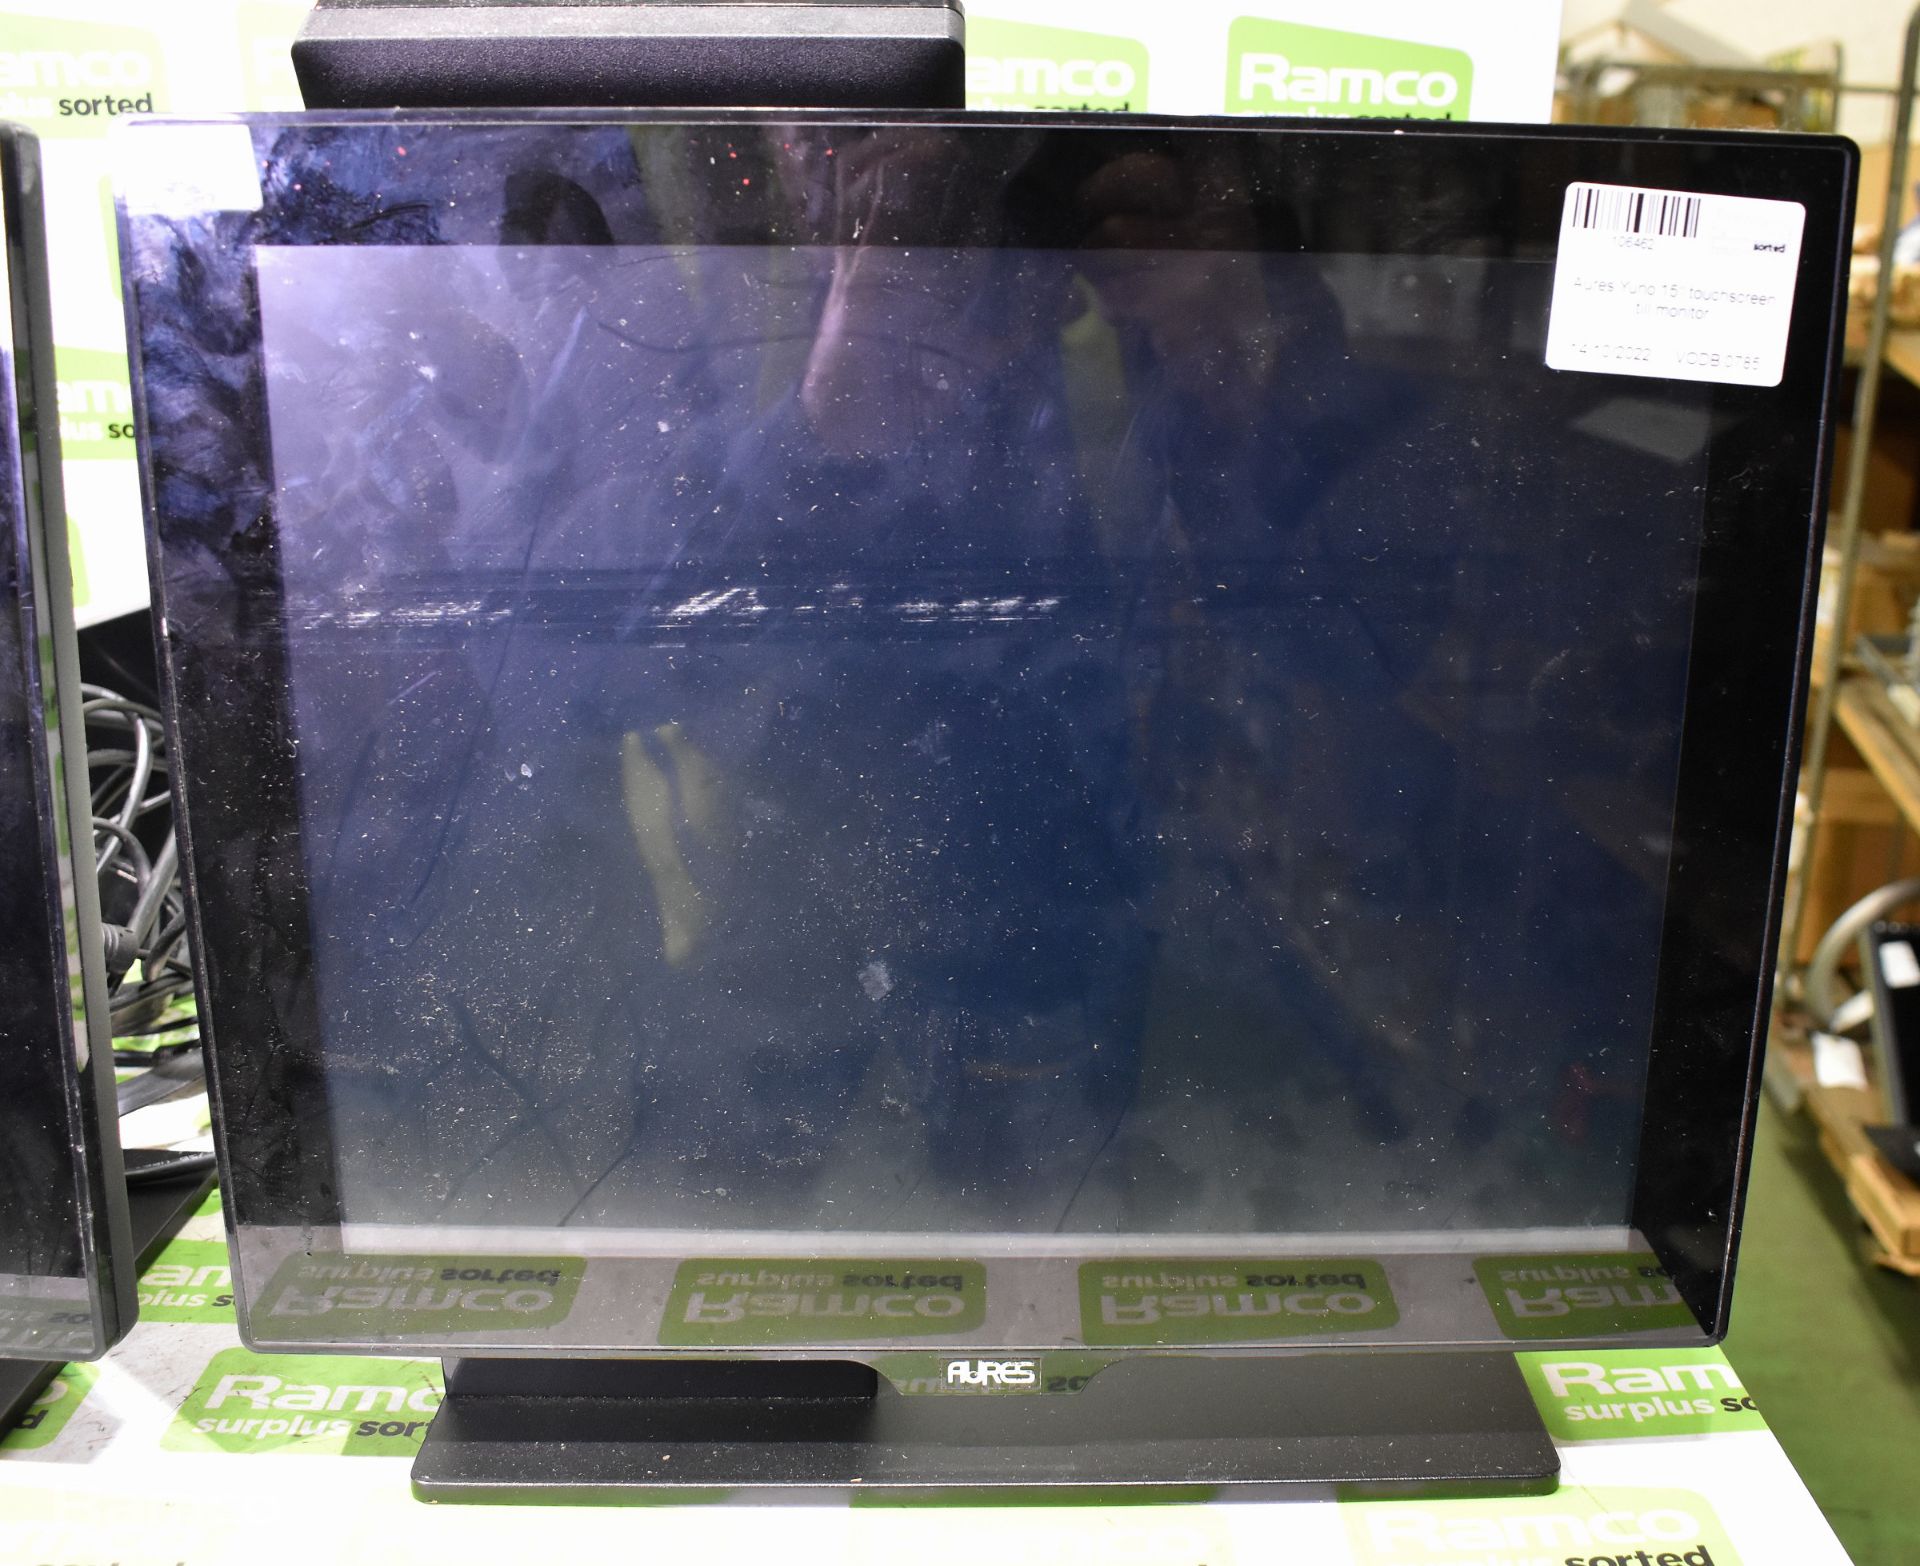 2x Aures Yuno 15" touch screen till monitors - Image 2 of 6